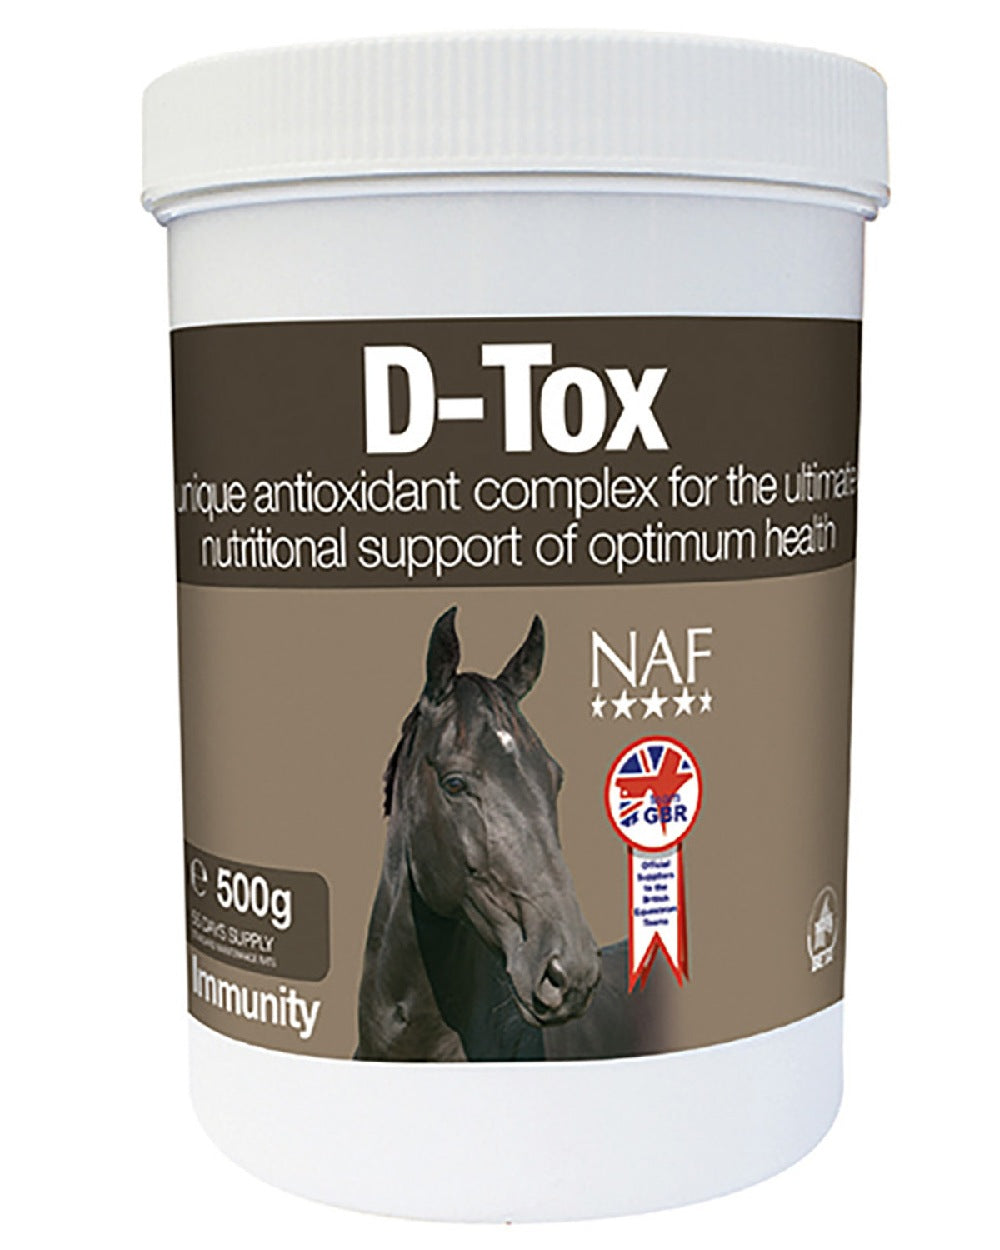 NAF D-Tox 500g on white background